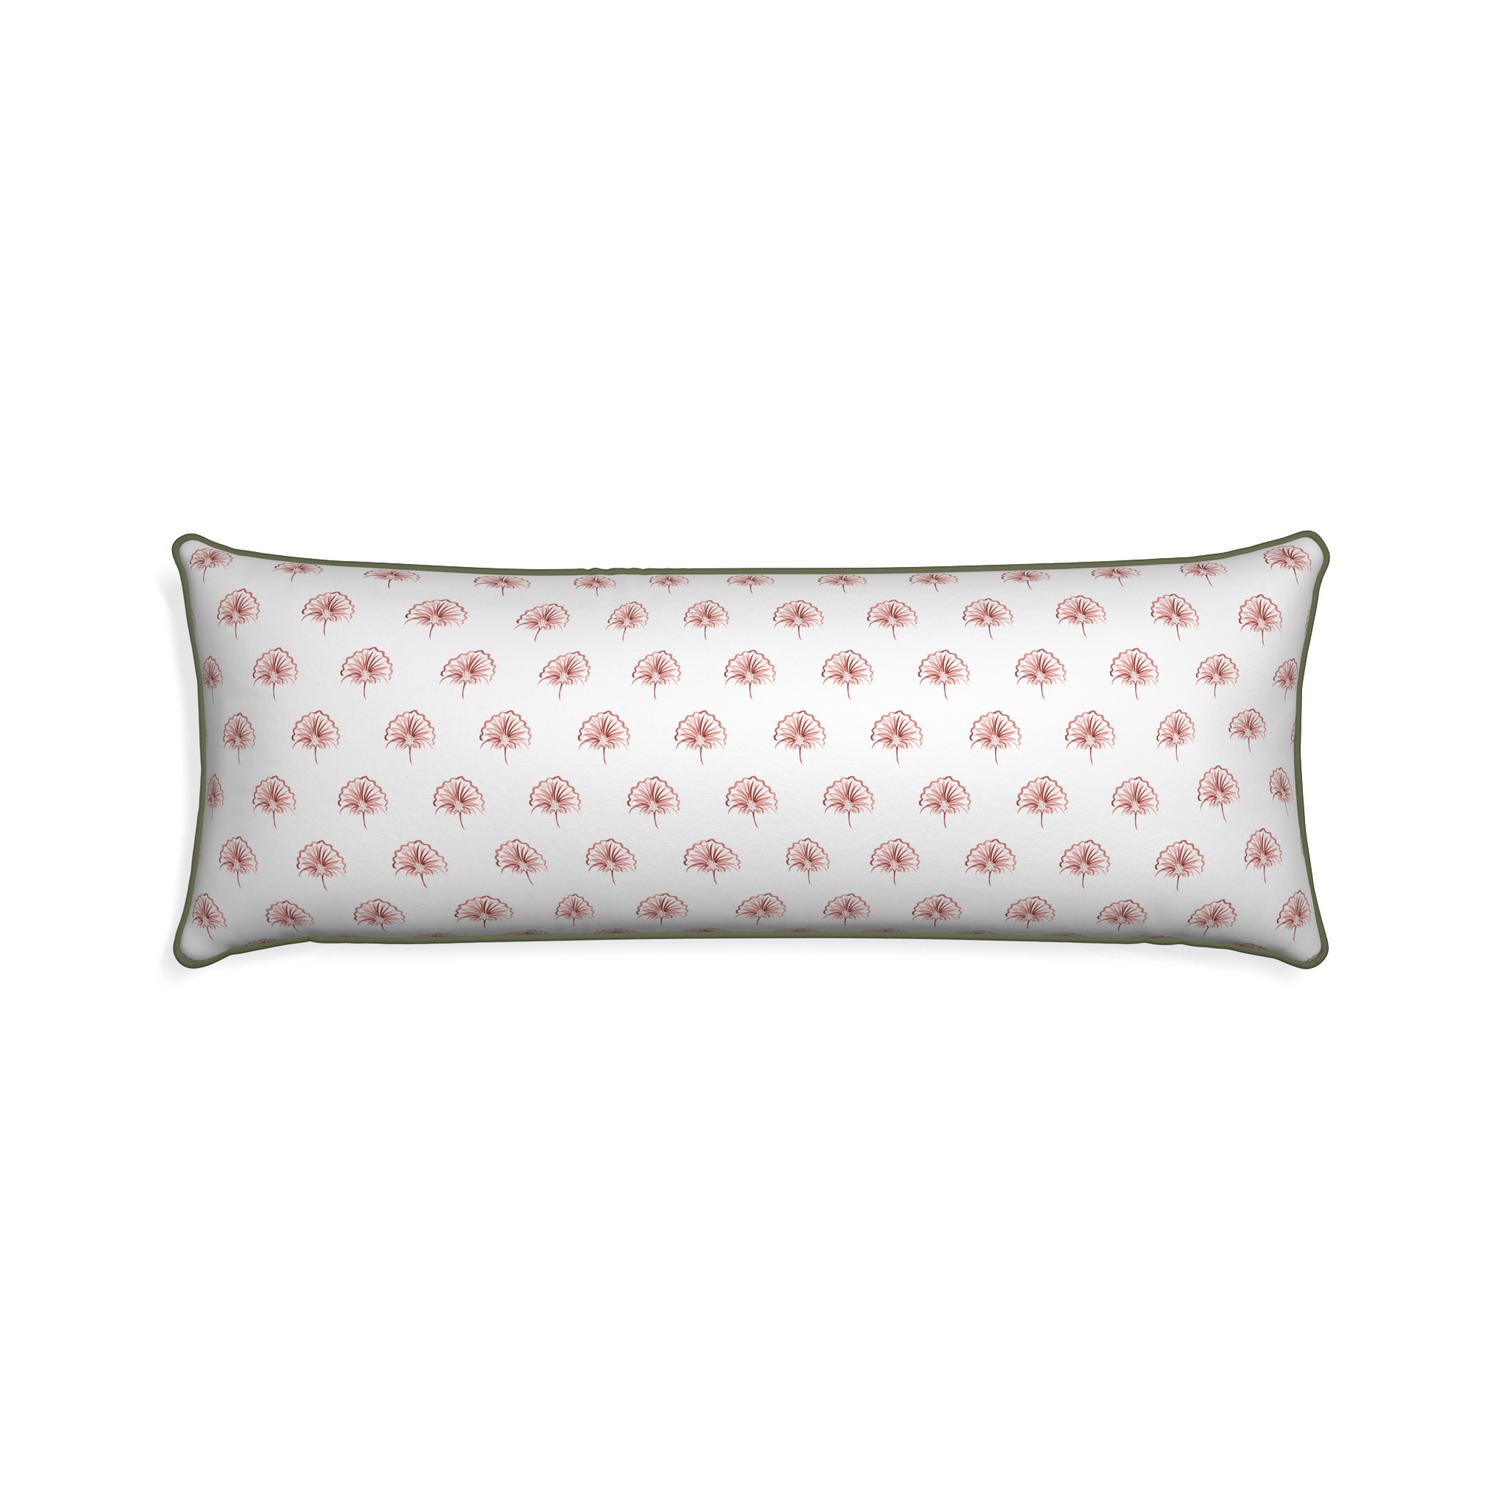 Xl-lumbar penelope rose custom floral pinkpillow with f piping on white background